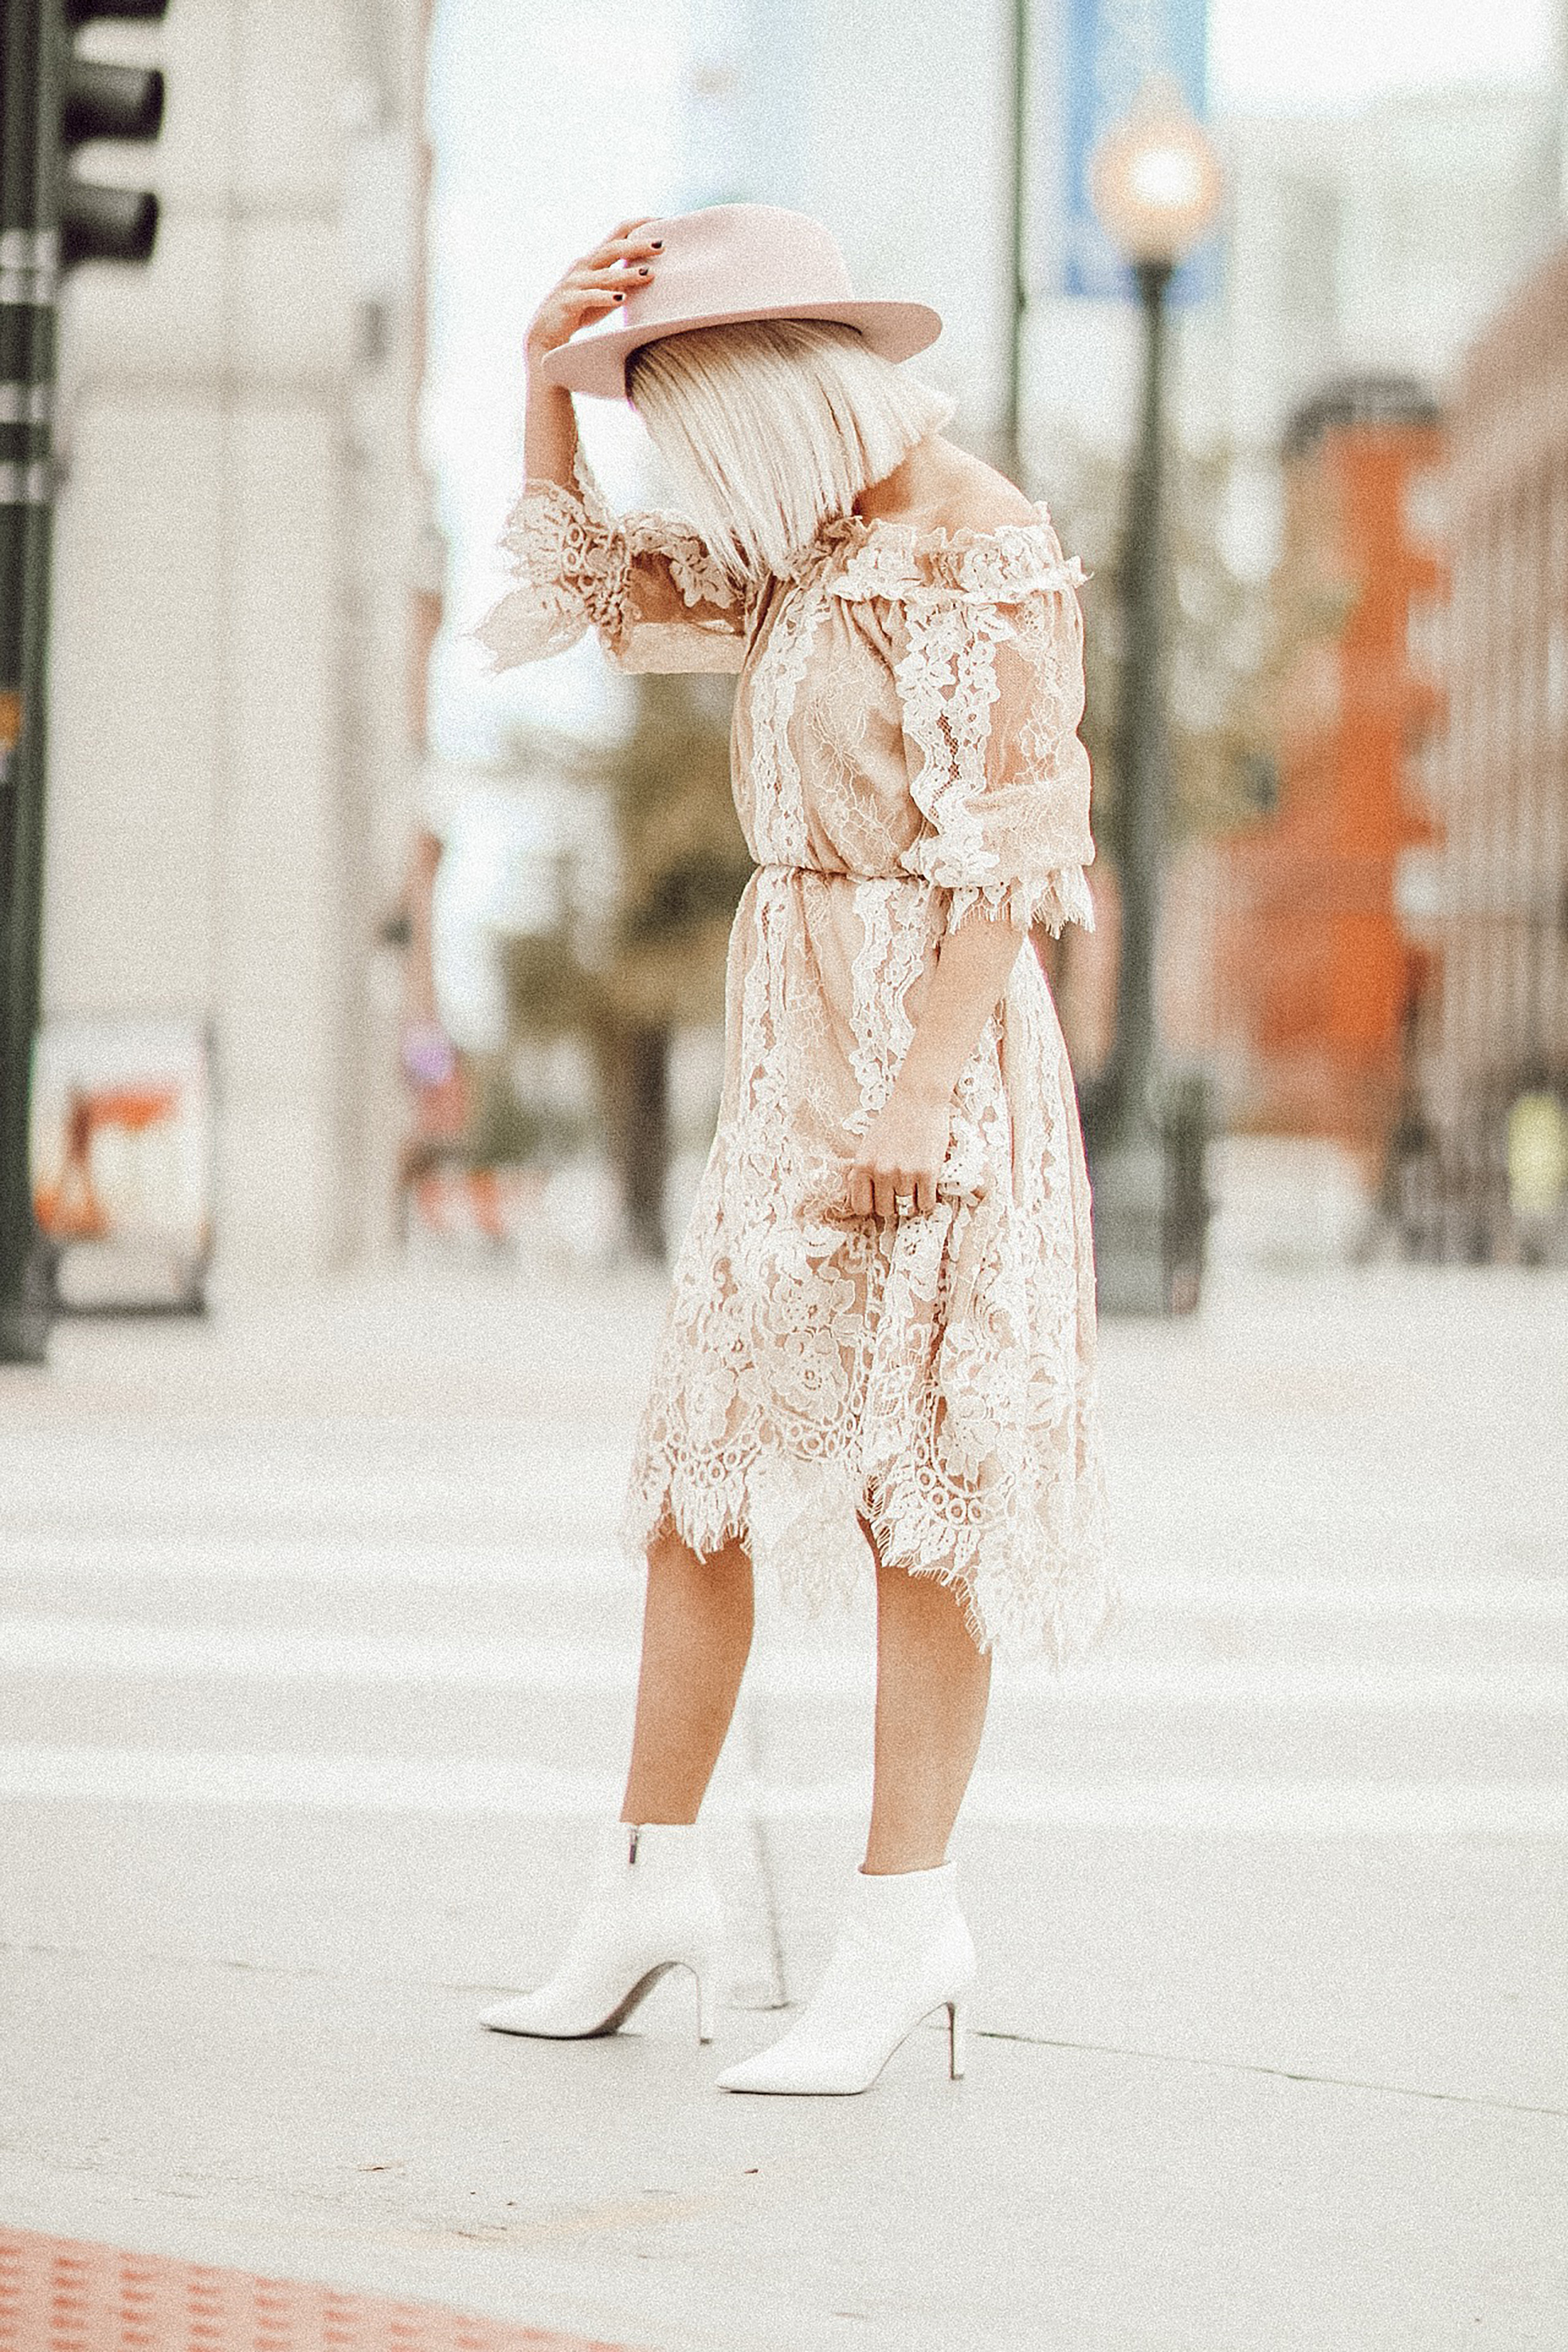 Alena Gidenko of modaprints.com shares her favorite lace dress for Fall and how she dressed it down